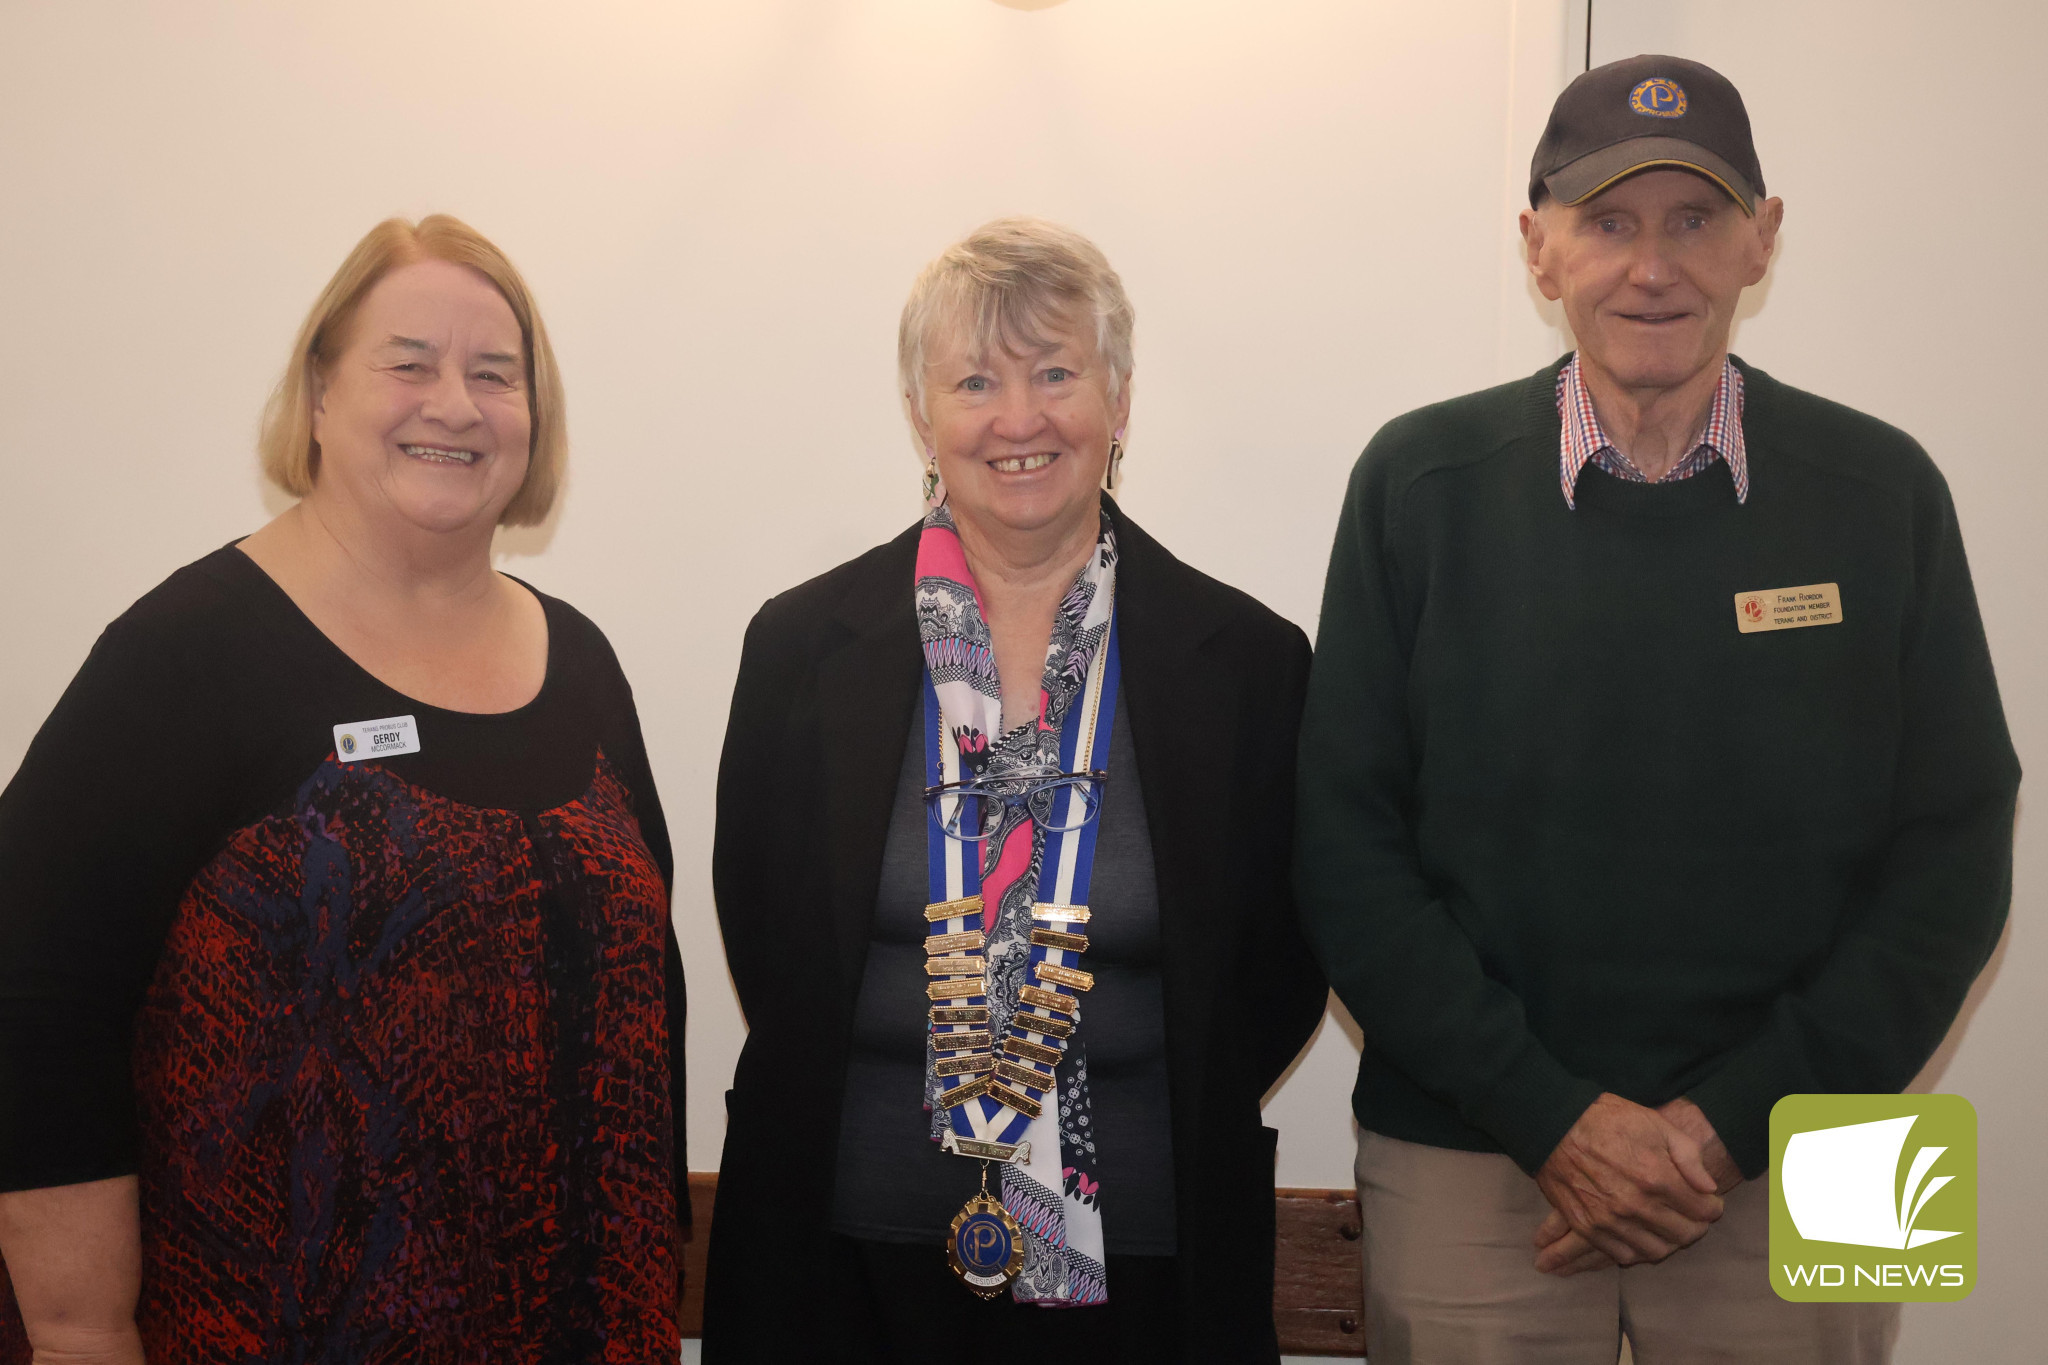 Still going strong: Terang and District Probus Club secretary Gerdy McCormack (from left), president Anne Gready and treasurer Frank Riordan are excited to see the club reach a significant milestone next month.